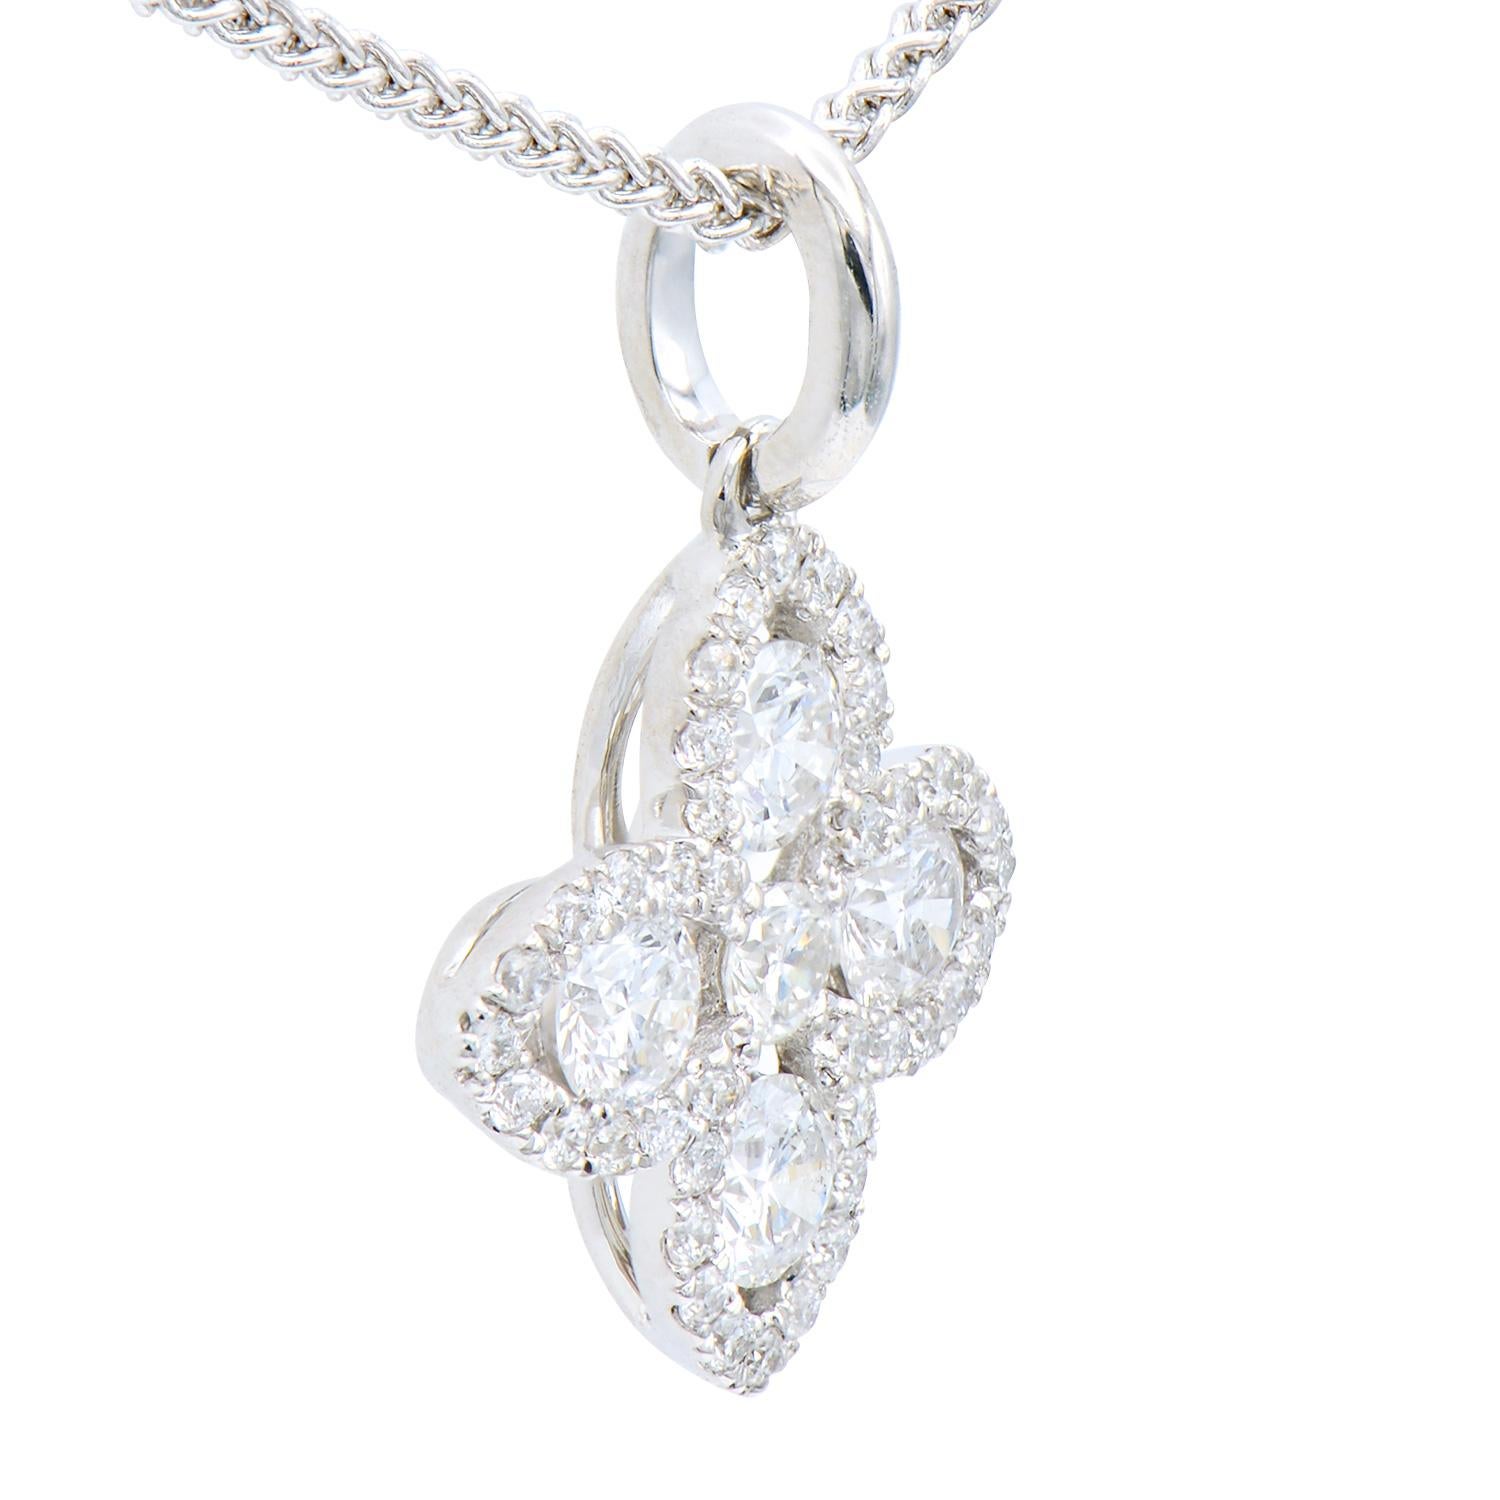 This beautiful pendant is made from 4 white gold diamonds totaling 0.33 carats which are surrounded by 41 round SI, H color diamonds totaling 0.15 carats. Together they form a lovely flower or four-leaf shape that is very classic and timeless. The